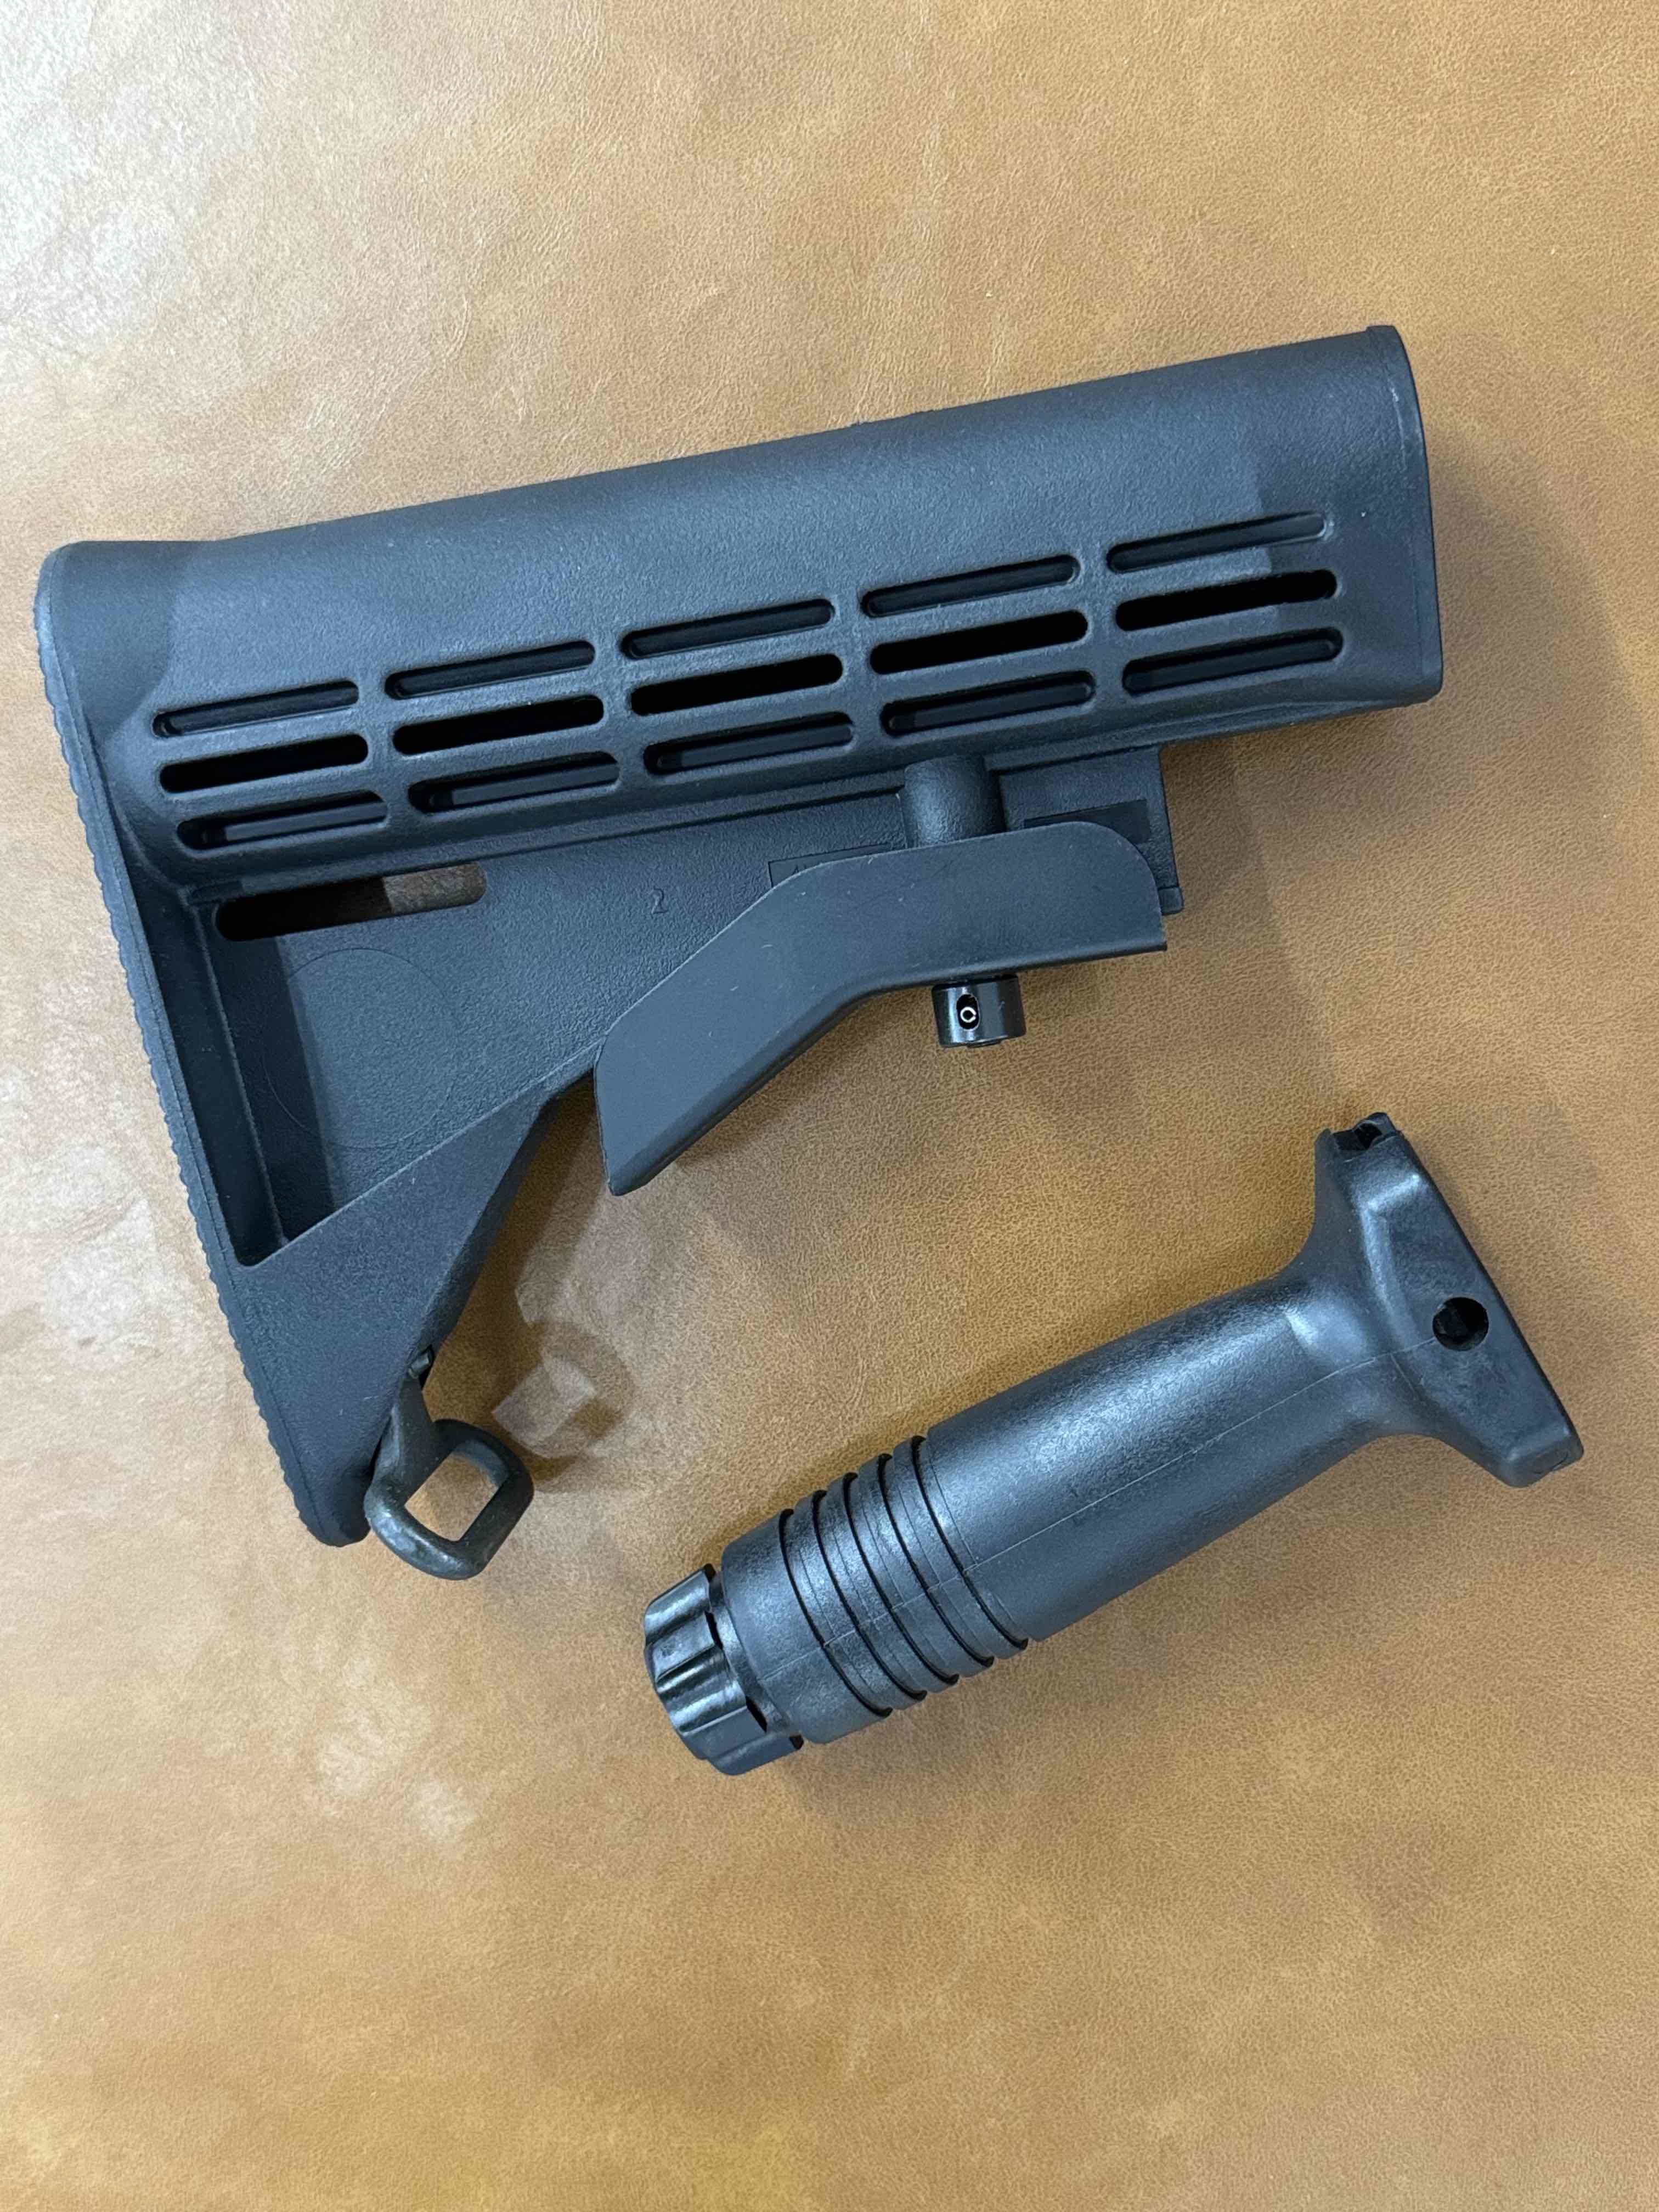 P+S Products Cage Code Stock and Vertical Grip